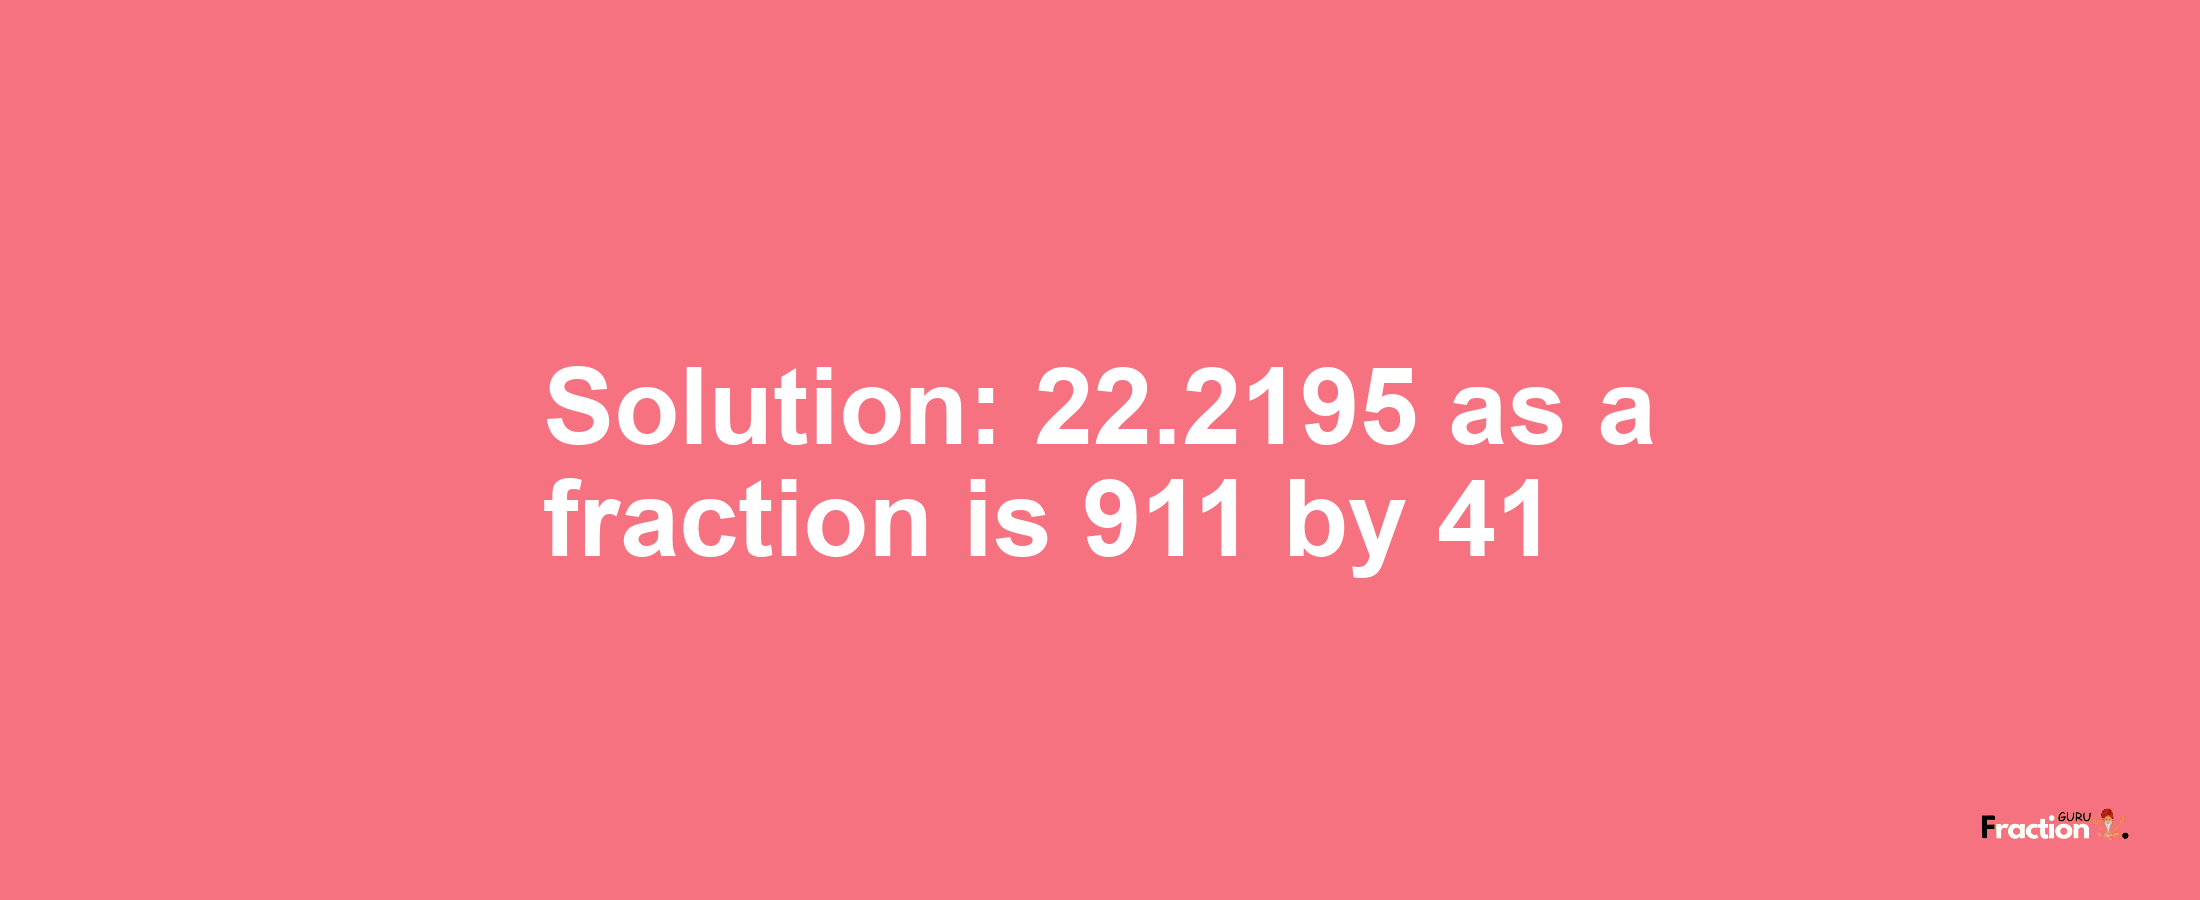 Solution:22.2195 as a fraction is 911/41